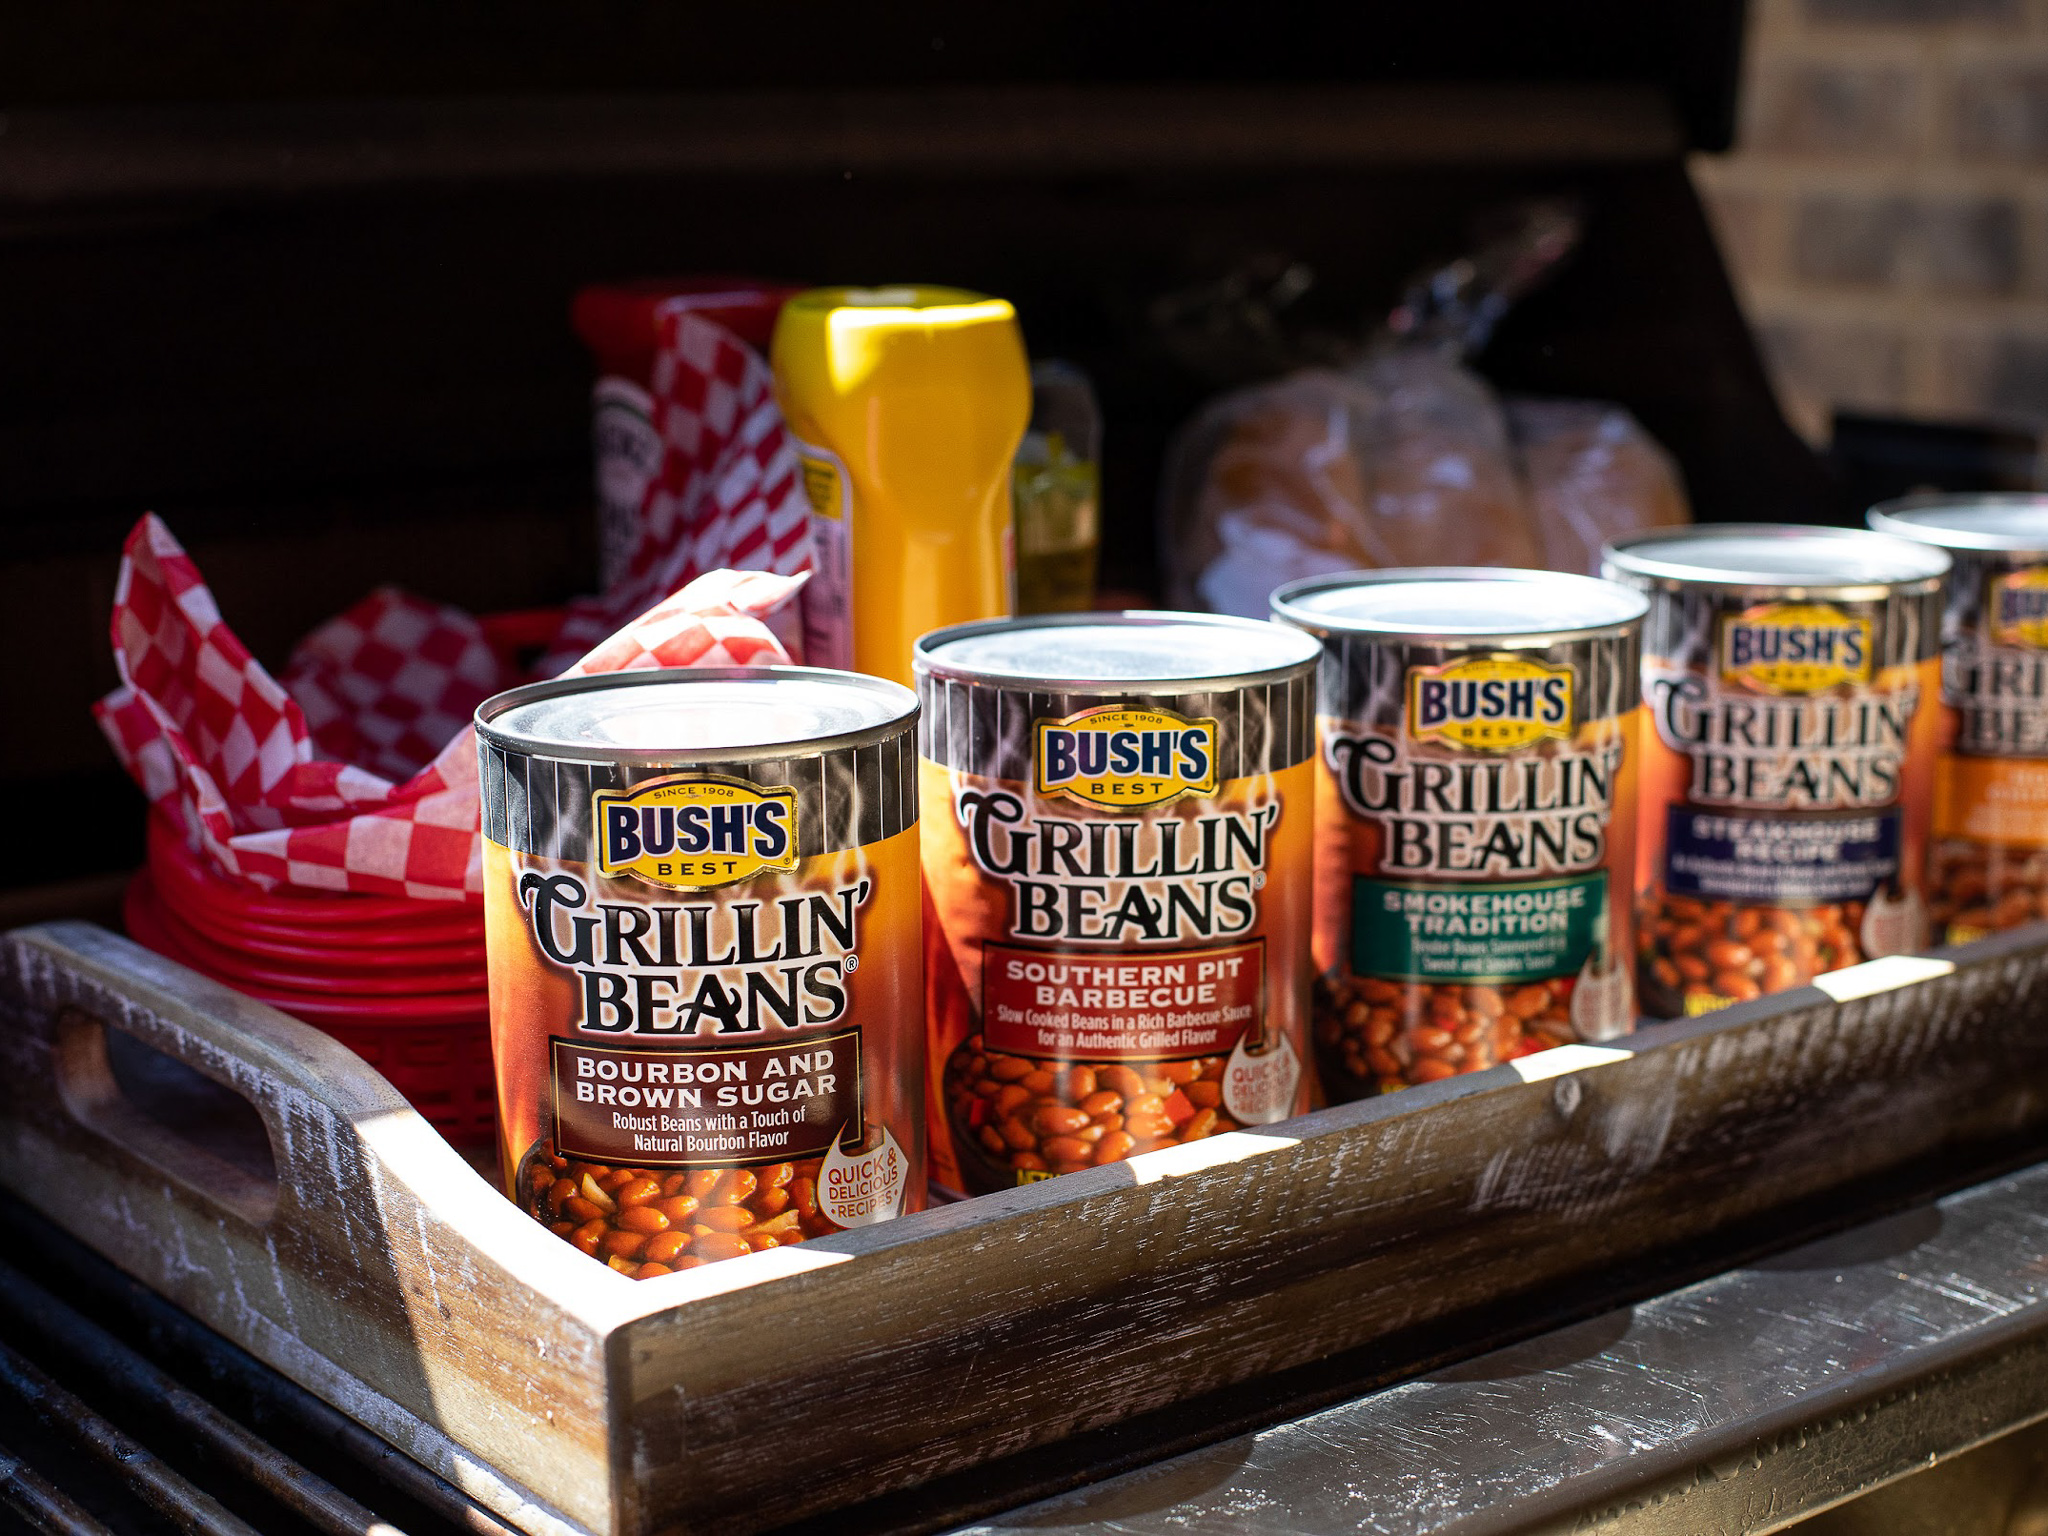 Get Bush’s Best Baked Beans Or Grillin’ Beans For Just $2 Per Can At Publix